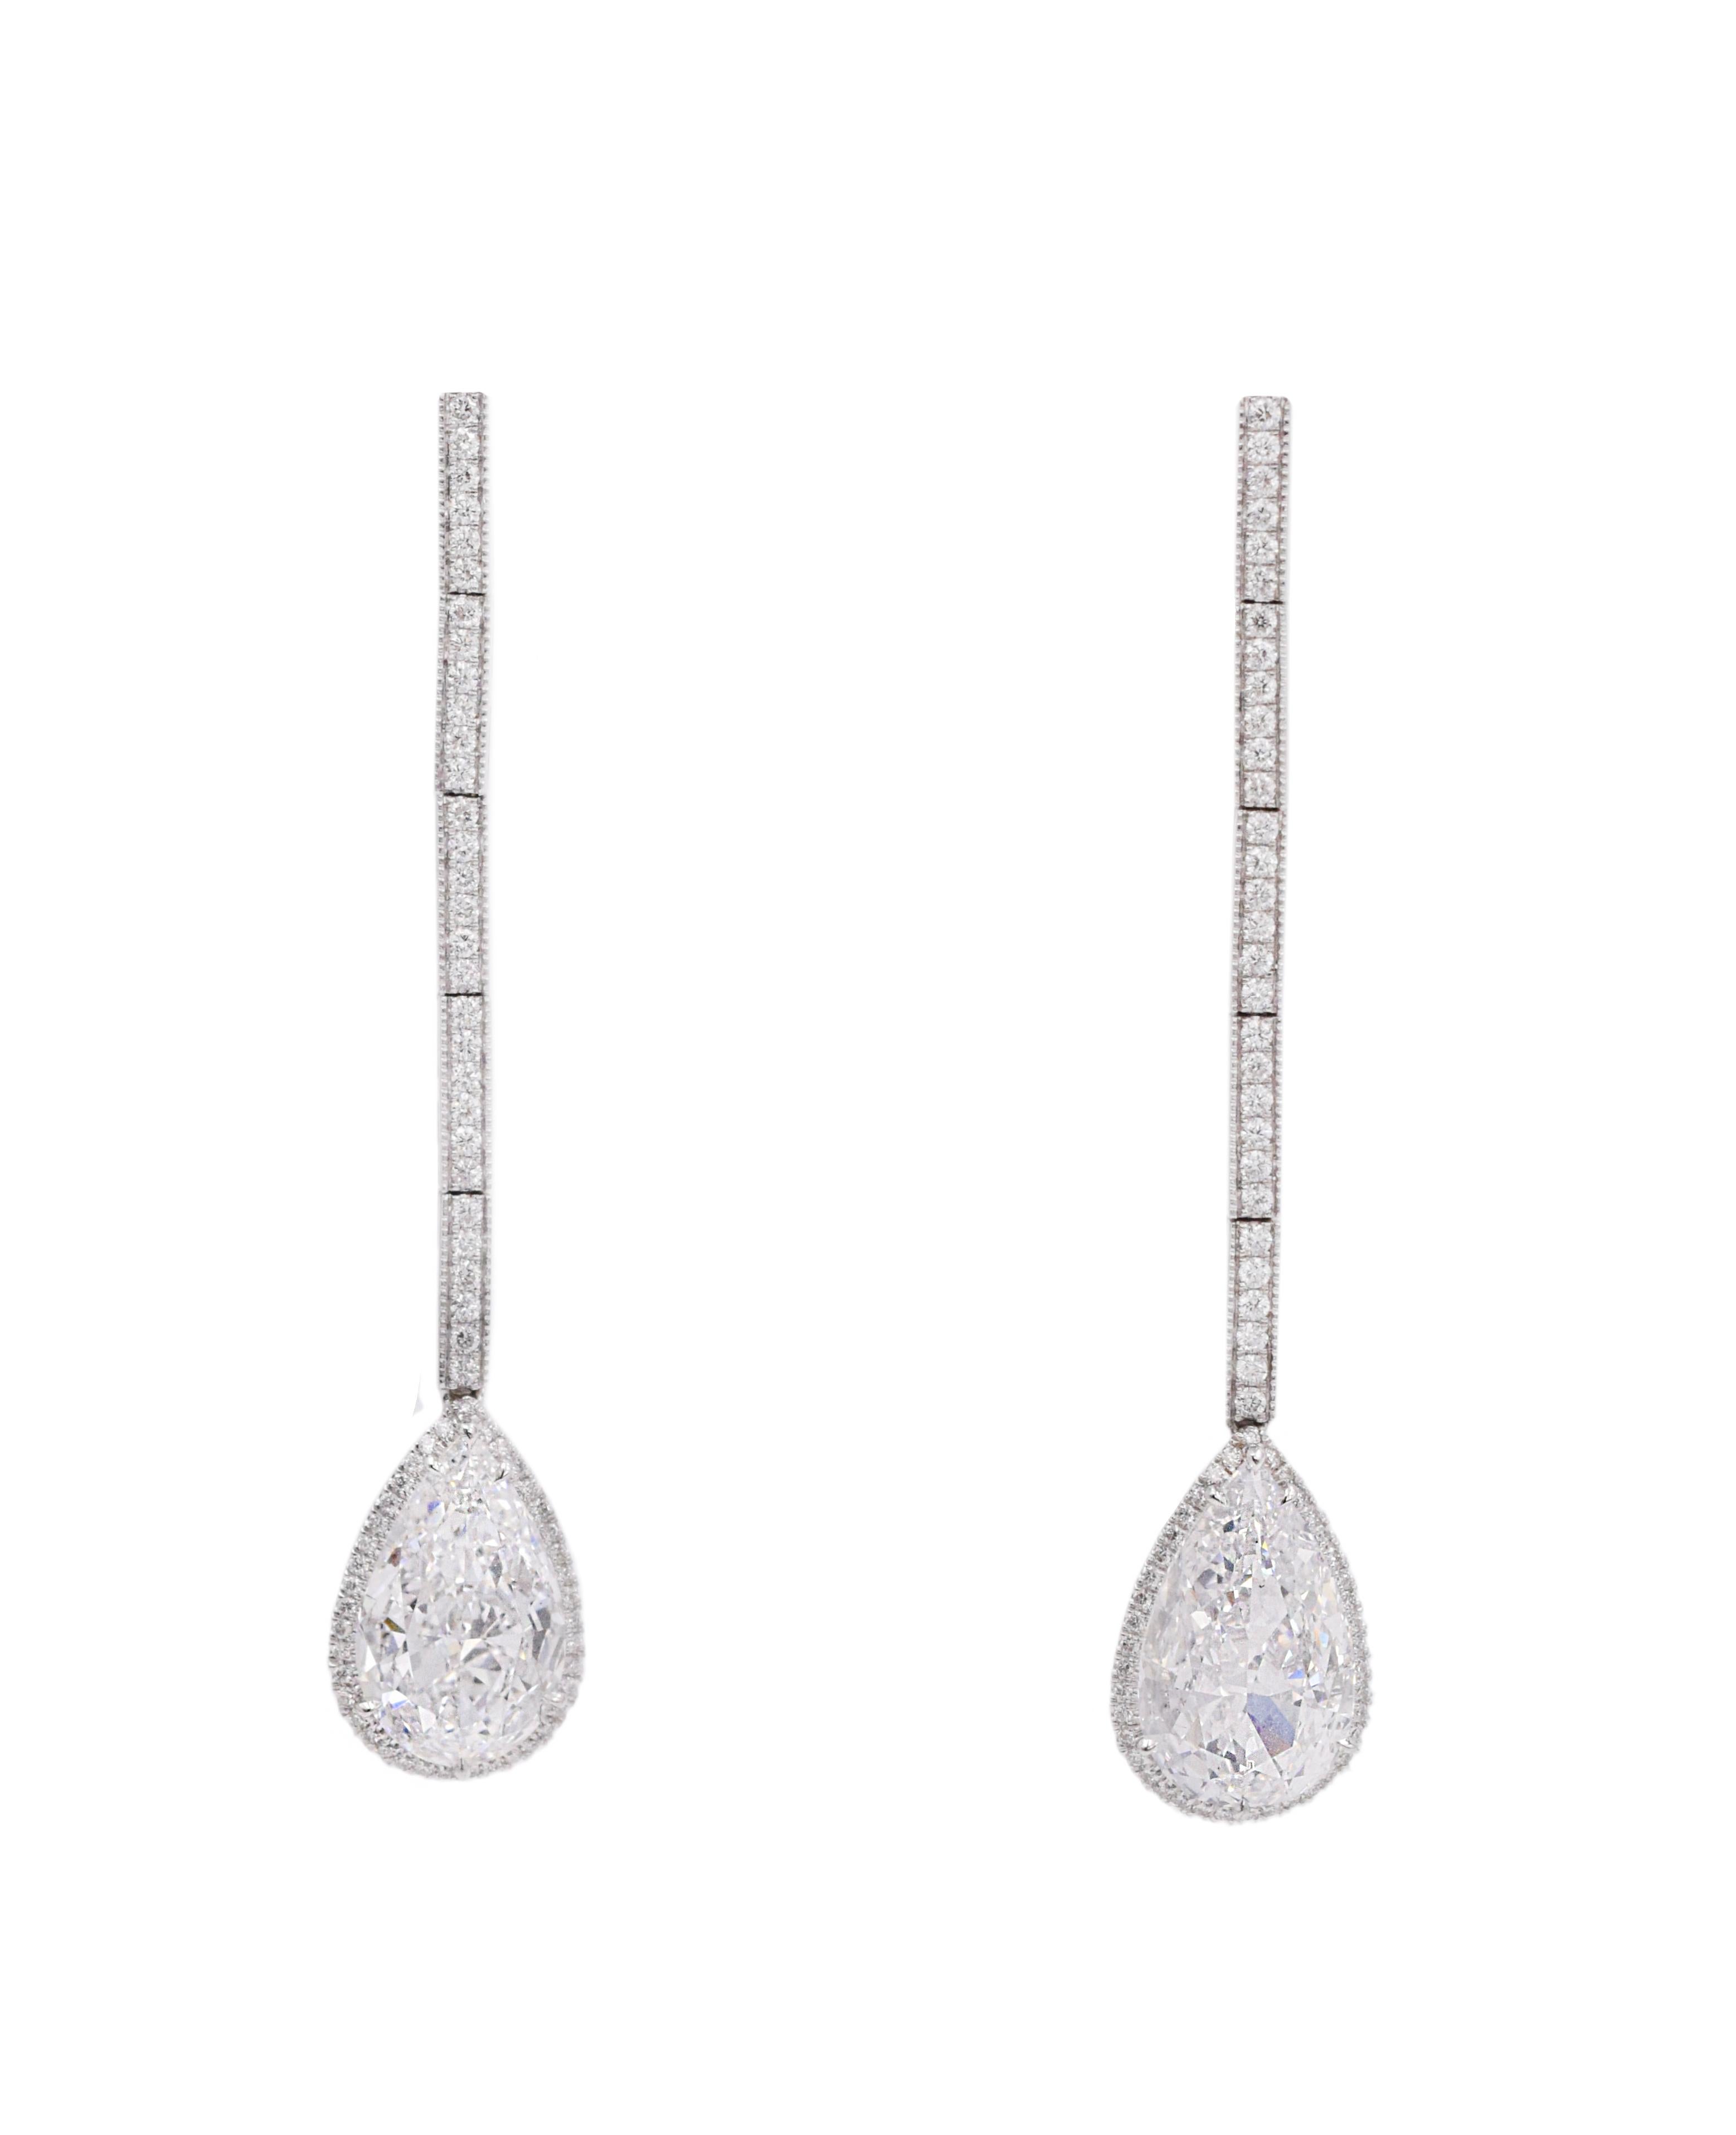 Pear shape drop earrings with the halo. Made in platinum and 18k white gold, set with 142 round brilliant cut diamonds, total weight 0.65 carats color: E-F, clarity: VS, with suspended with two GIA certified diamonds 3.02carat and 3.03 carat 
Both